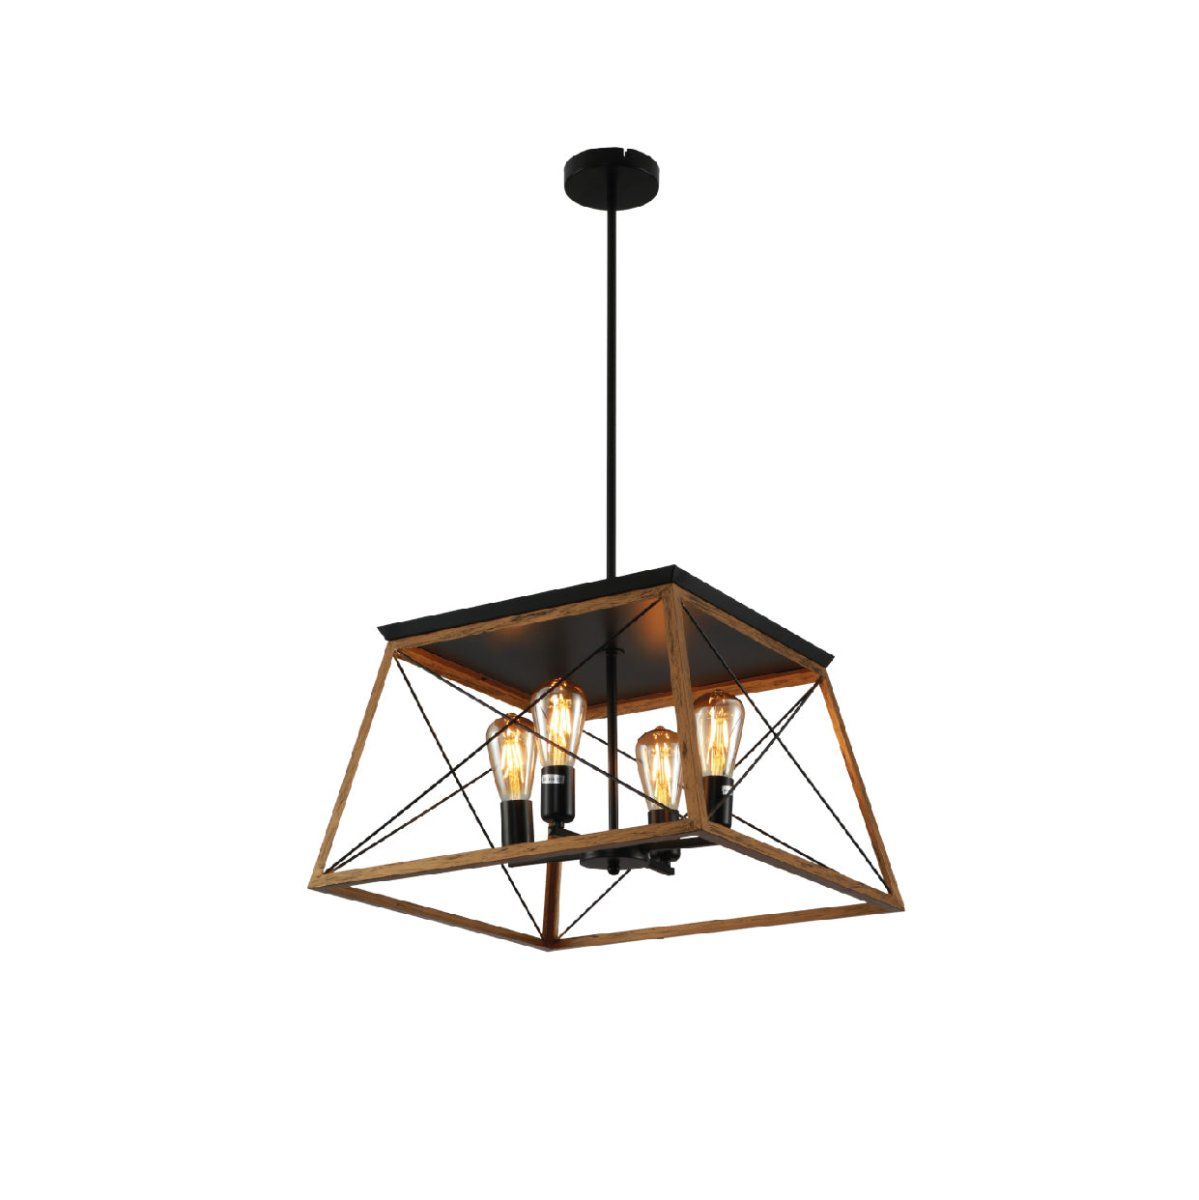 Main image of Caged Candle Industrial Kitchen Island Retro Square Pendant Ceiling Light with 4xE27 Gold Black Finishing | TEKLED 159-17870